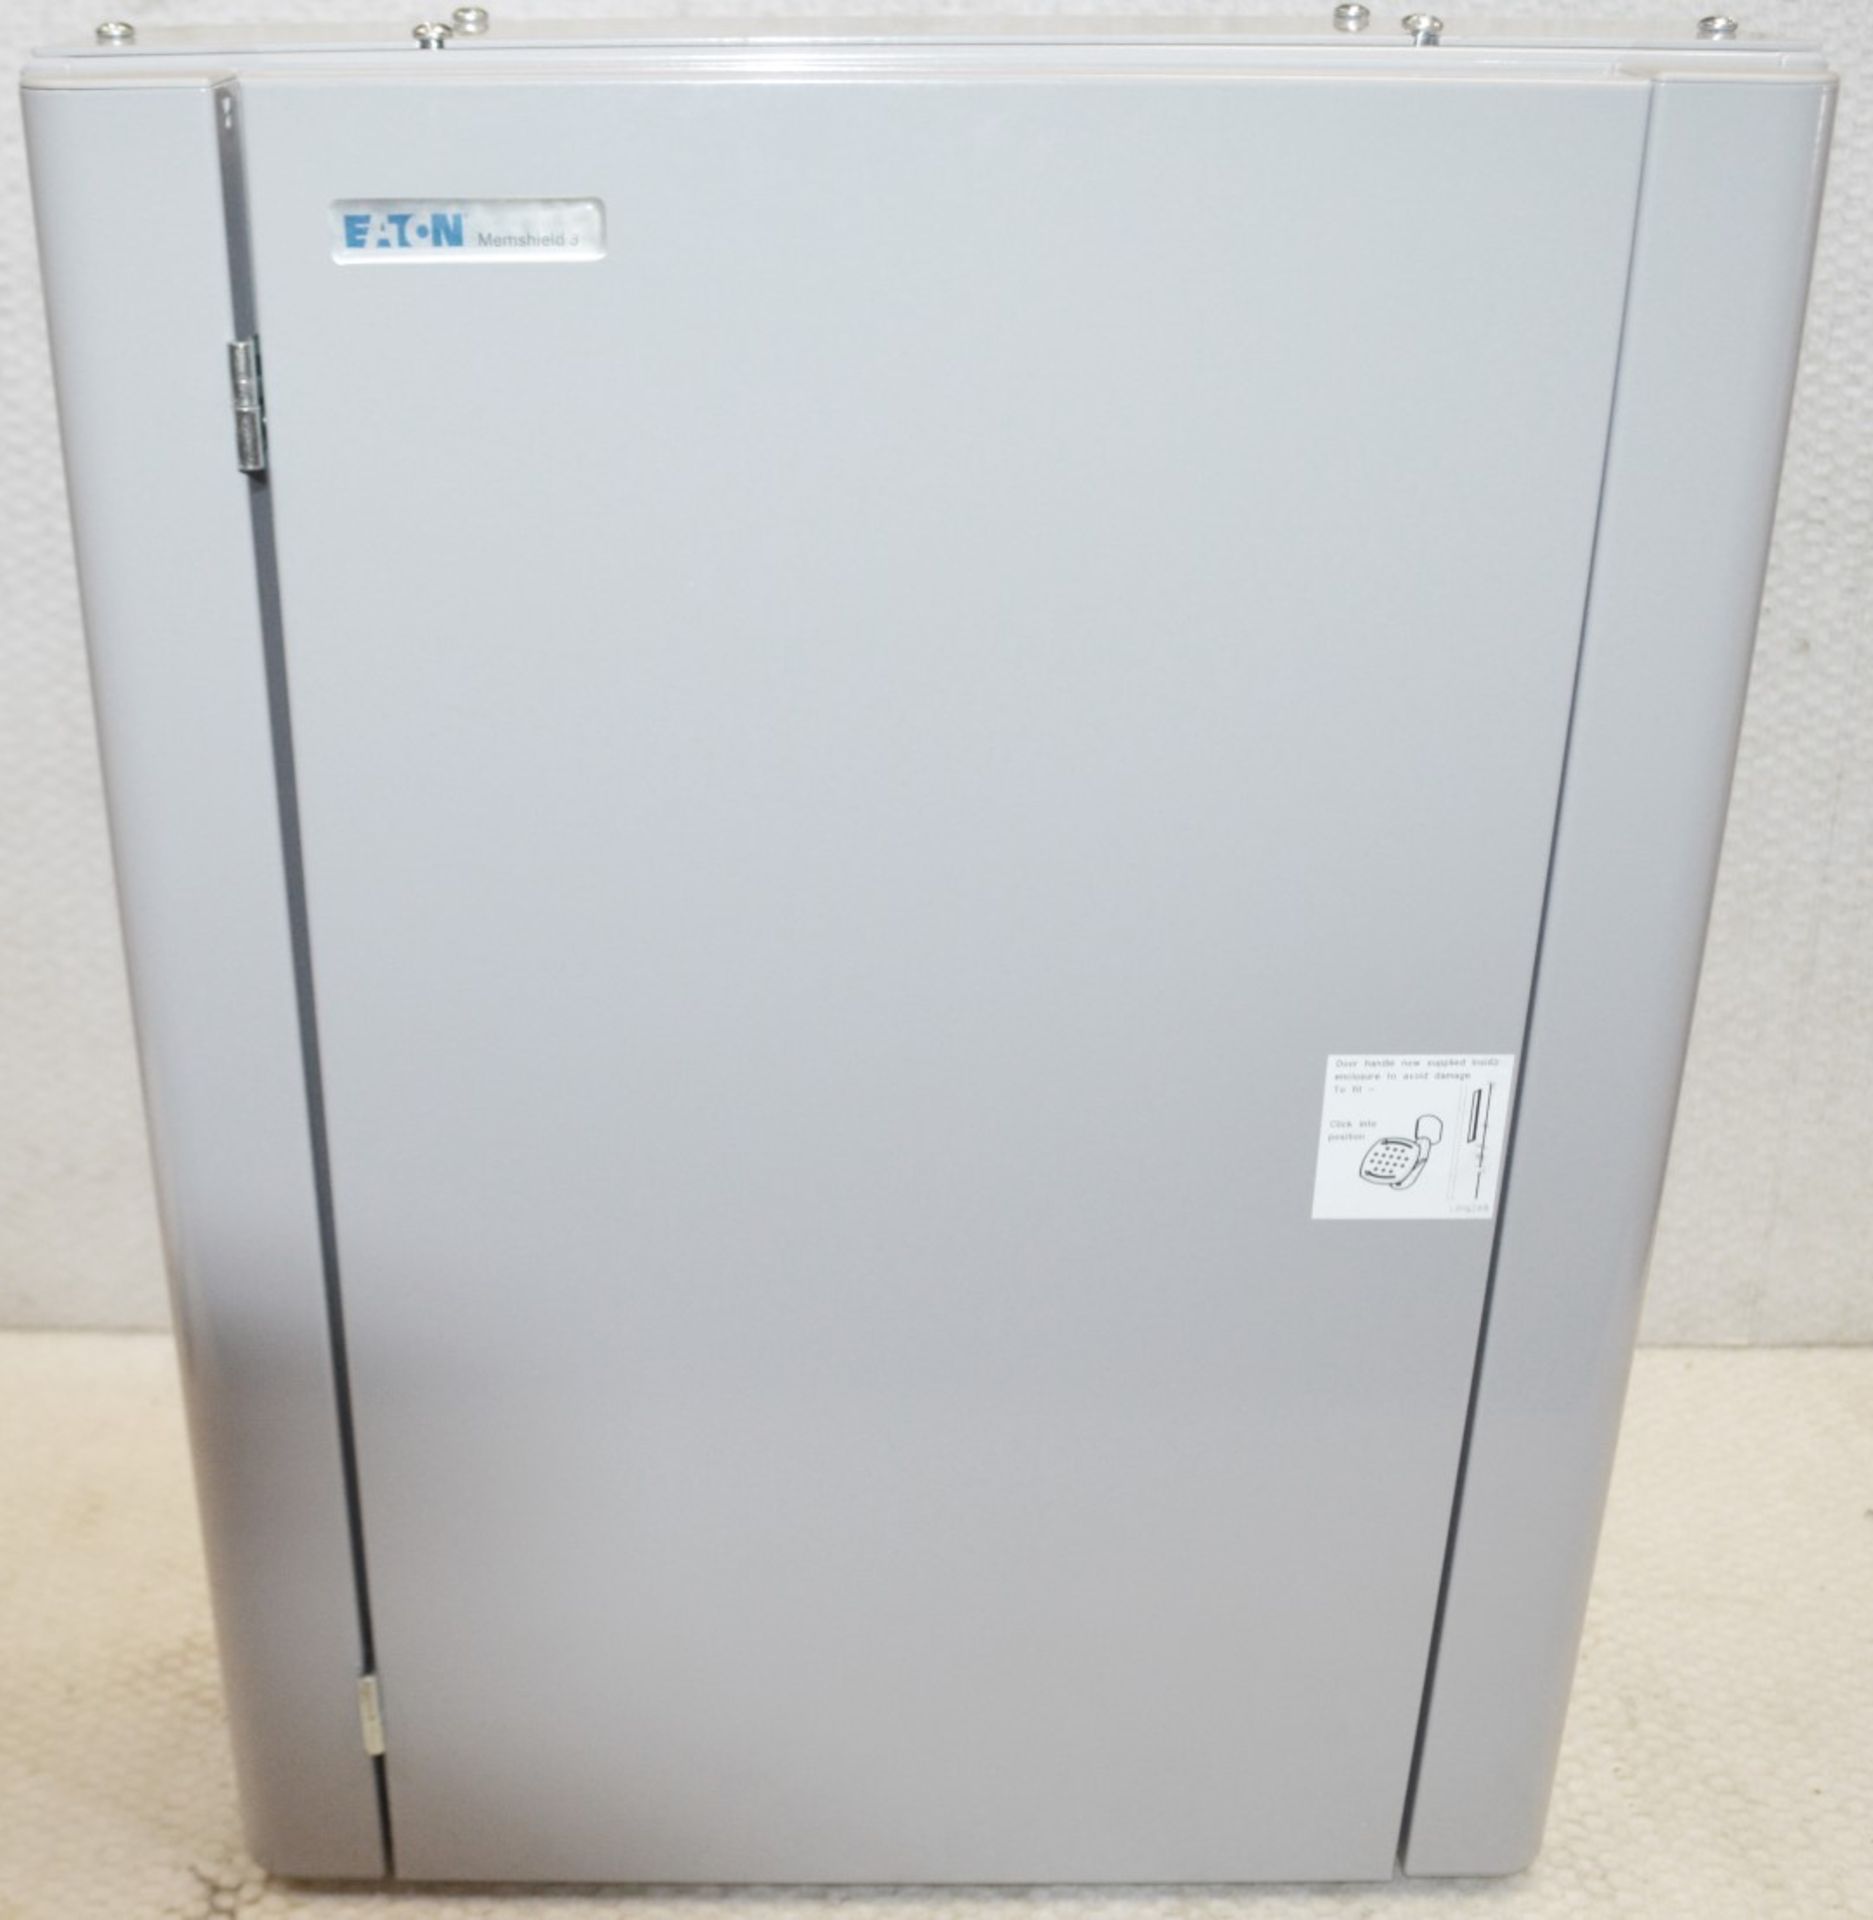 1 x Eaton MEM 125A 12 Way Triple Pole and Neutral 3 Phase Distribution Board Cabinet - CL011 - - Image 2 of 3